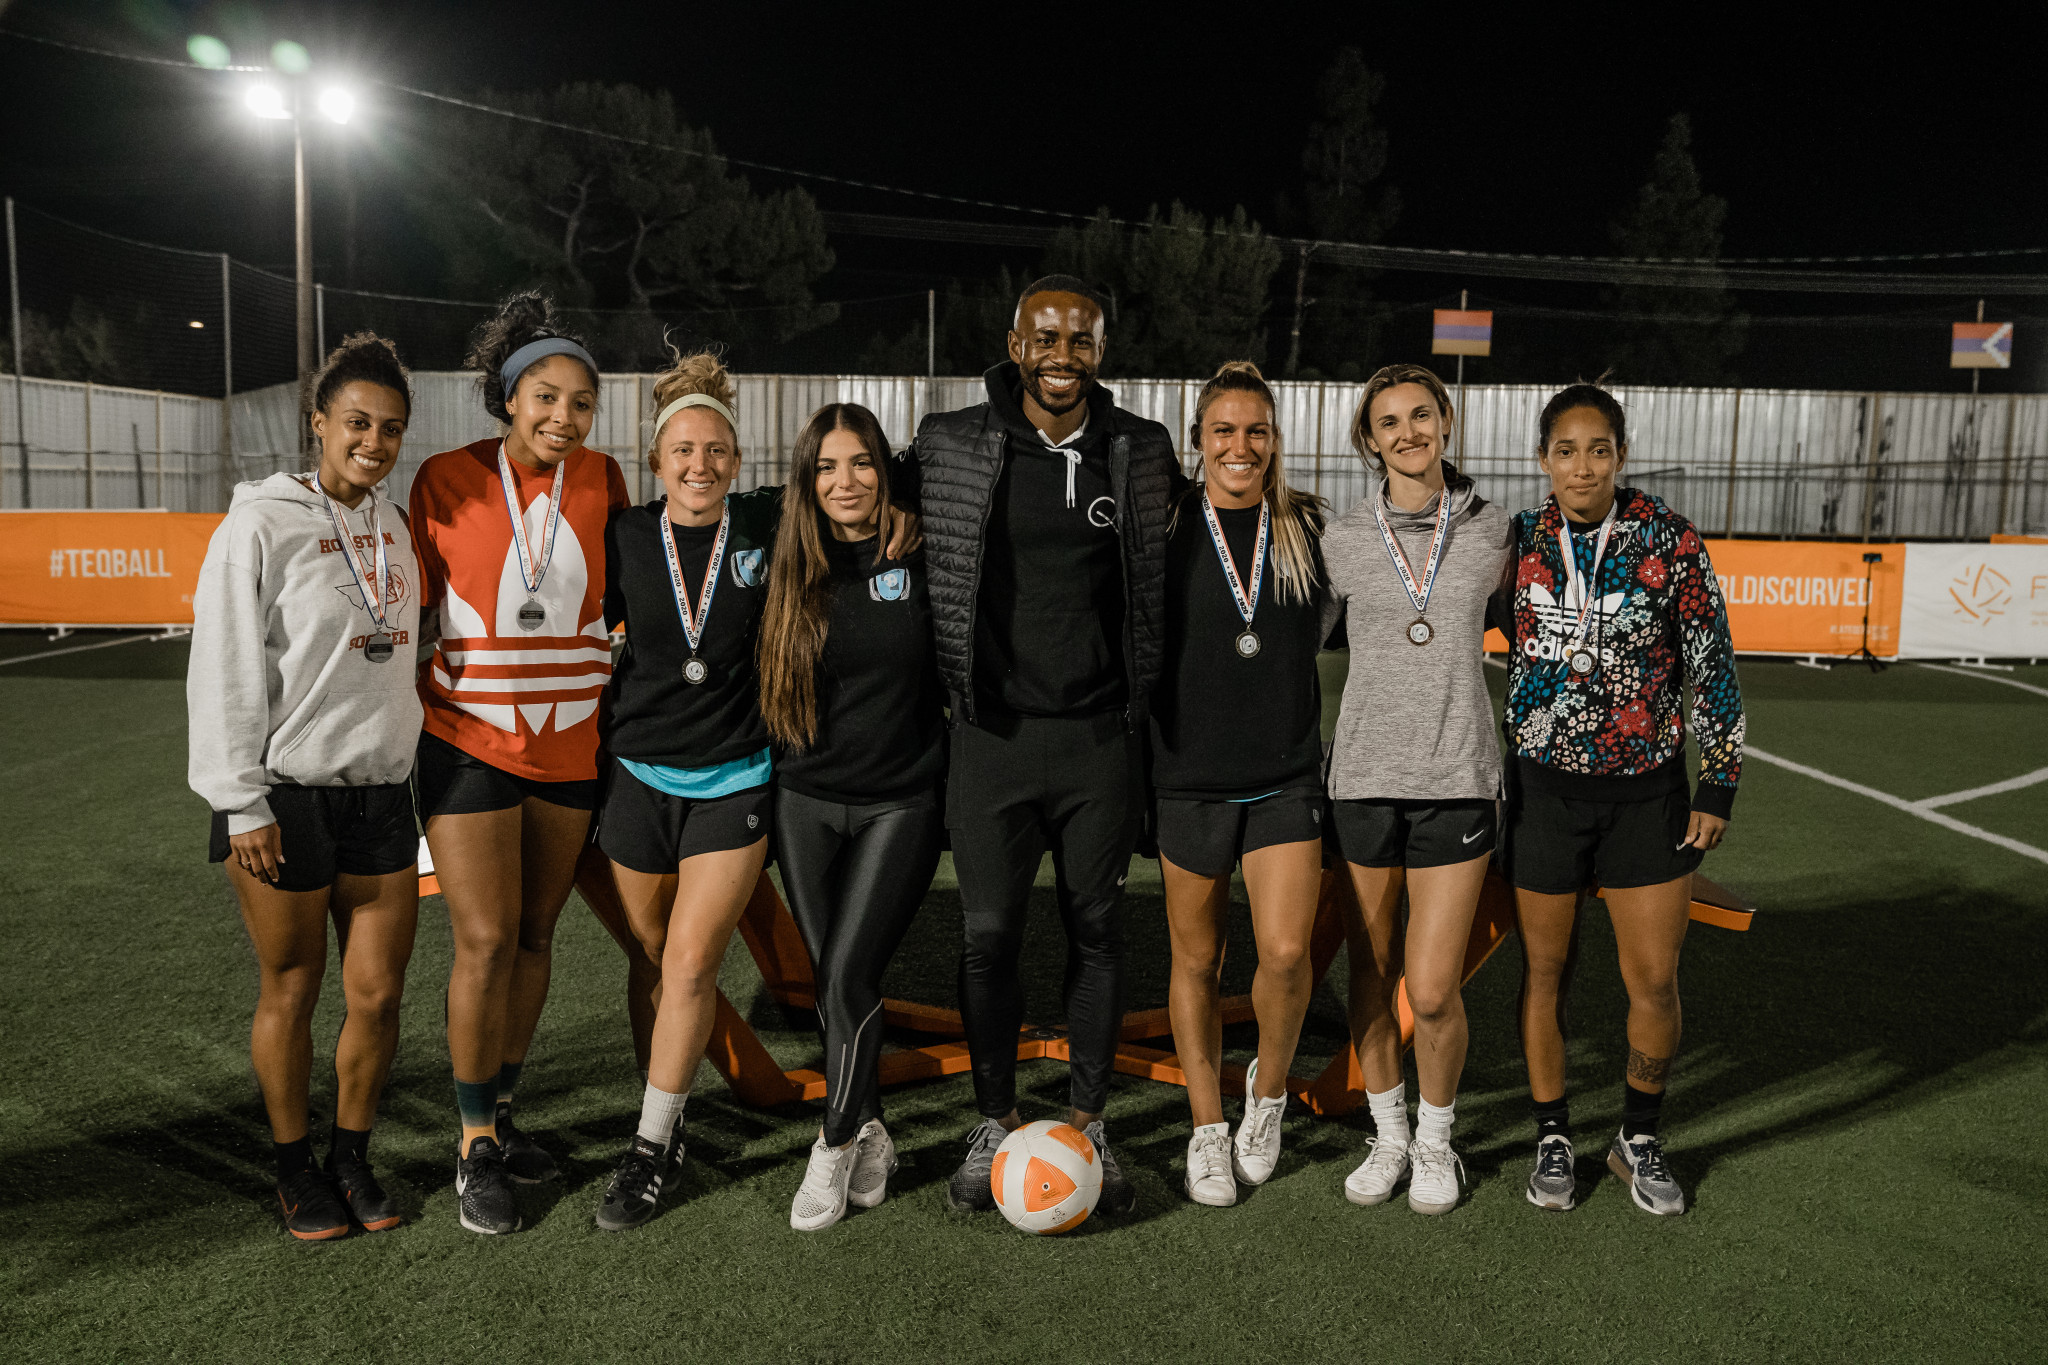 Los Angeles hosts first-ever all-women's teqball Challenger Cup